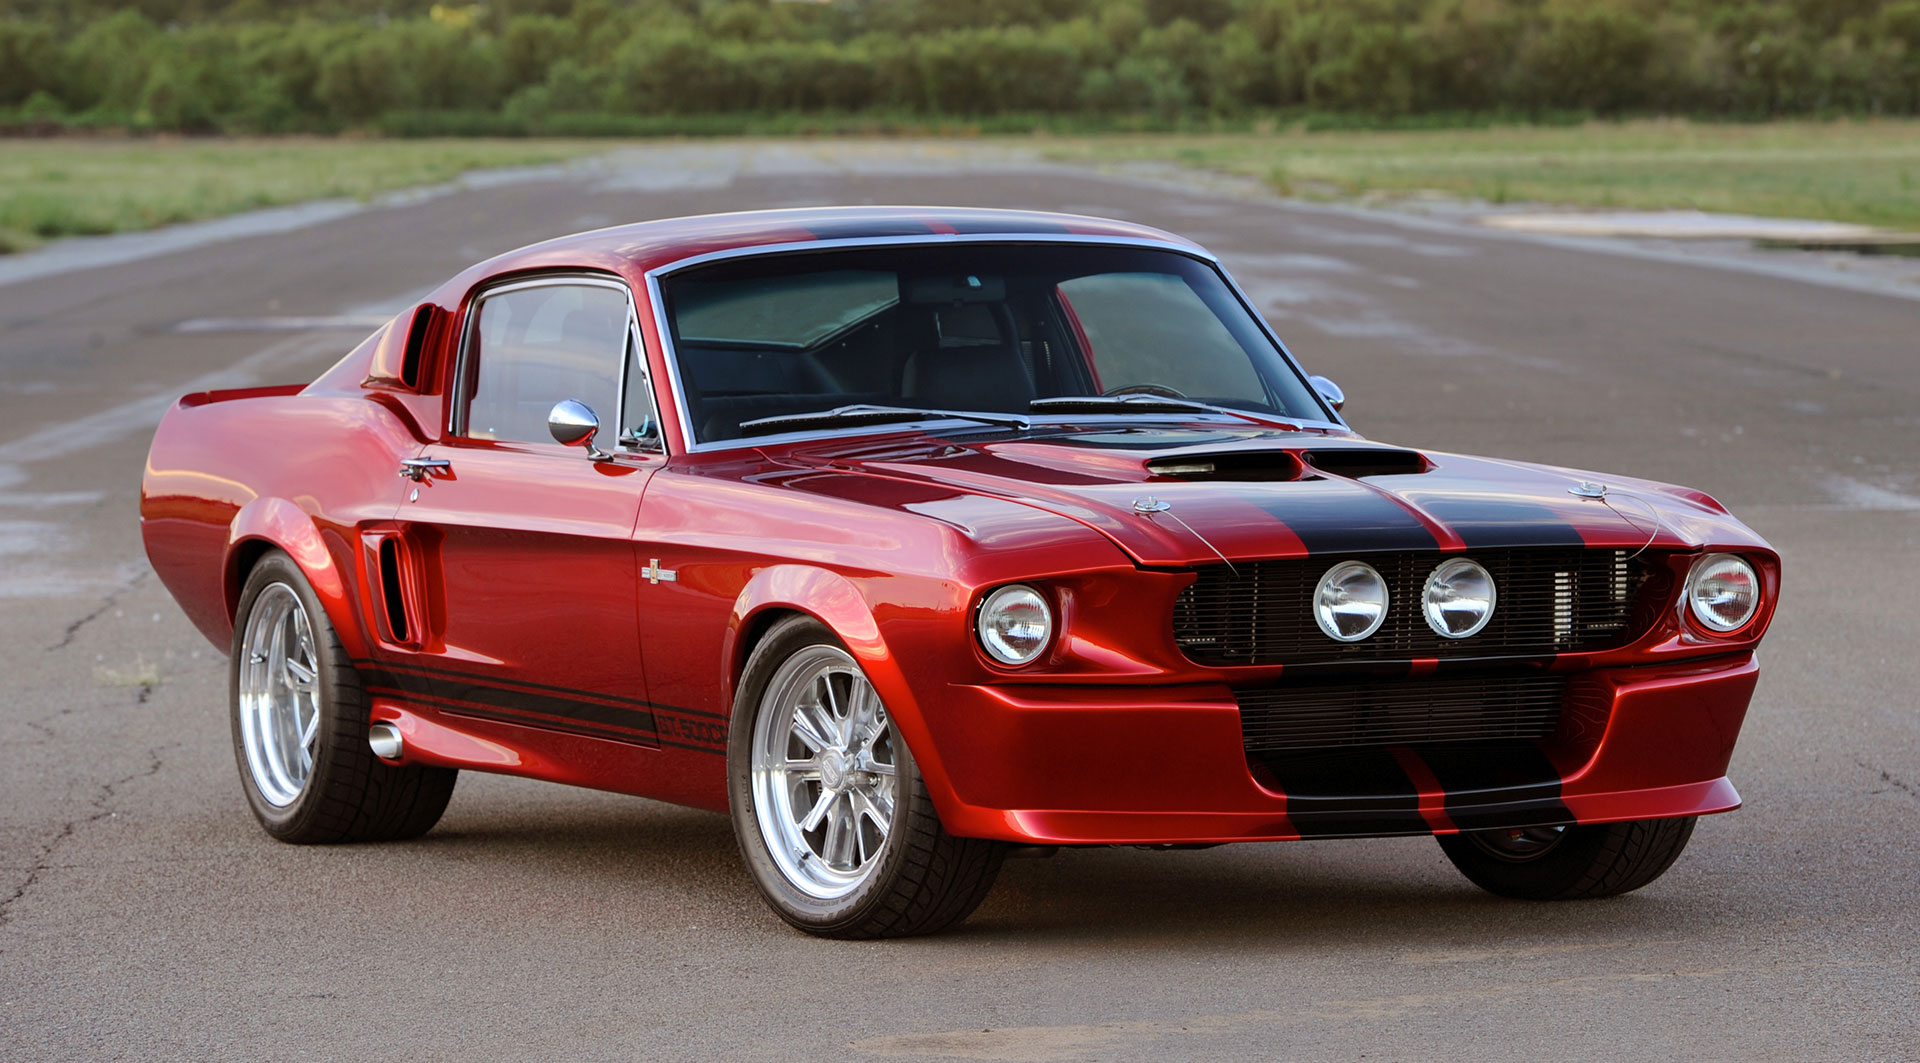 1967 Shelby GT500CR candy red with black stripes built by Classic Recreations